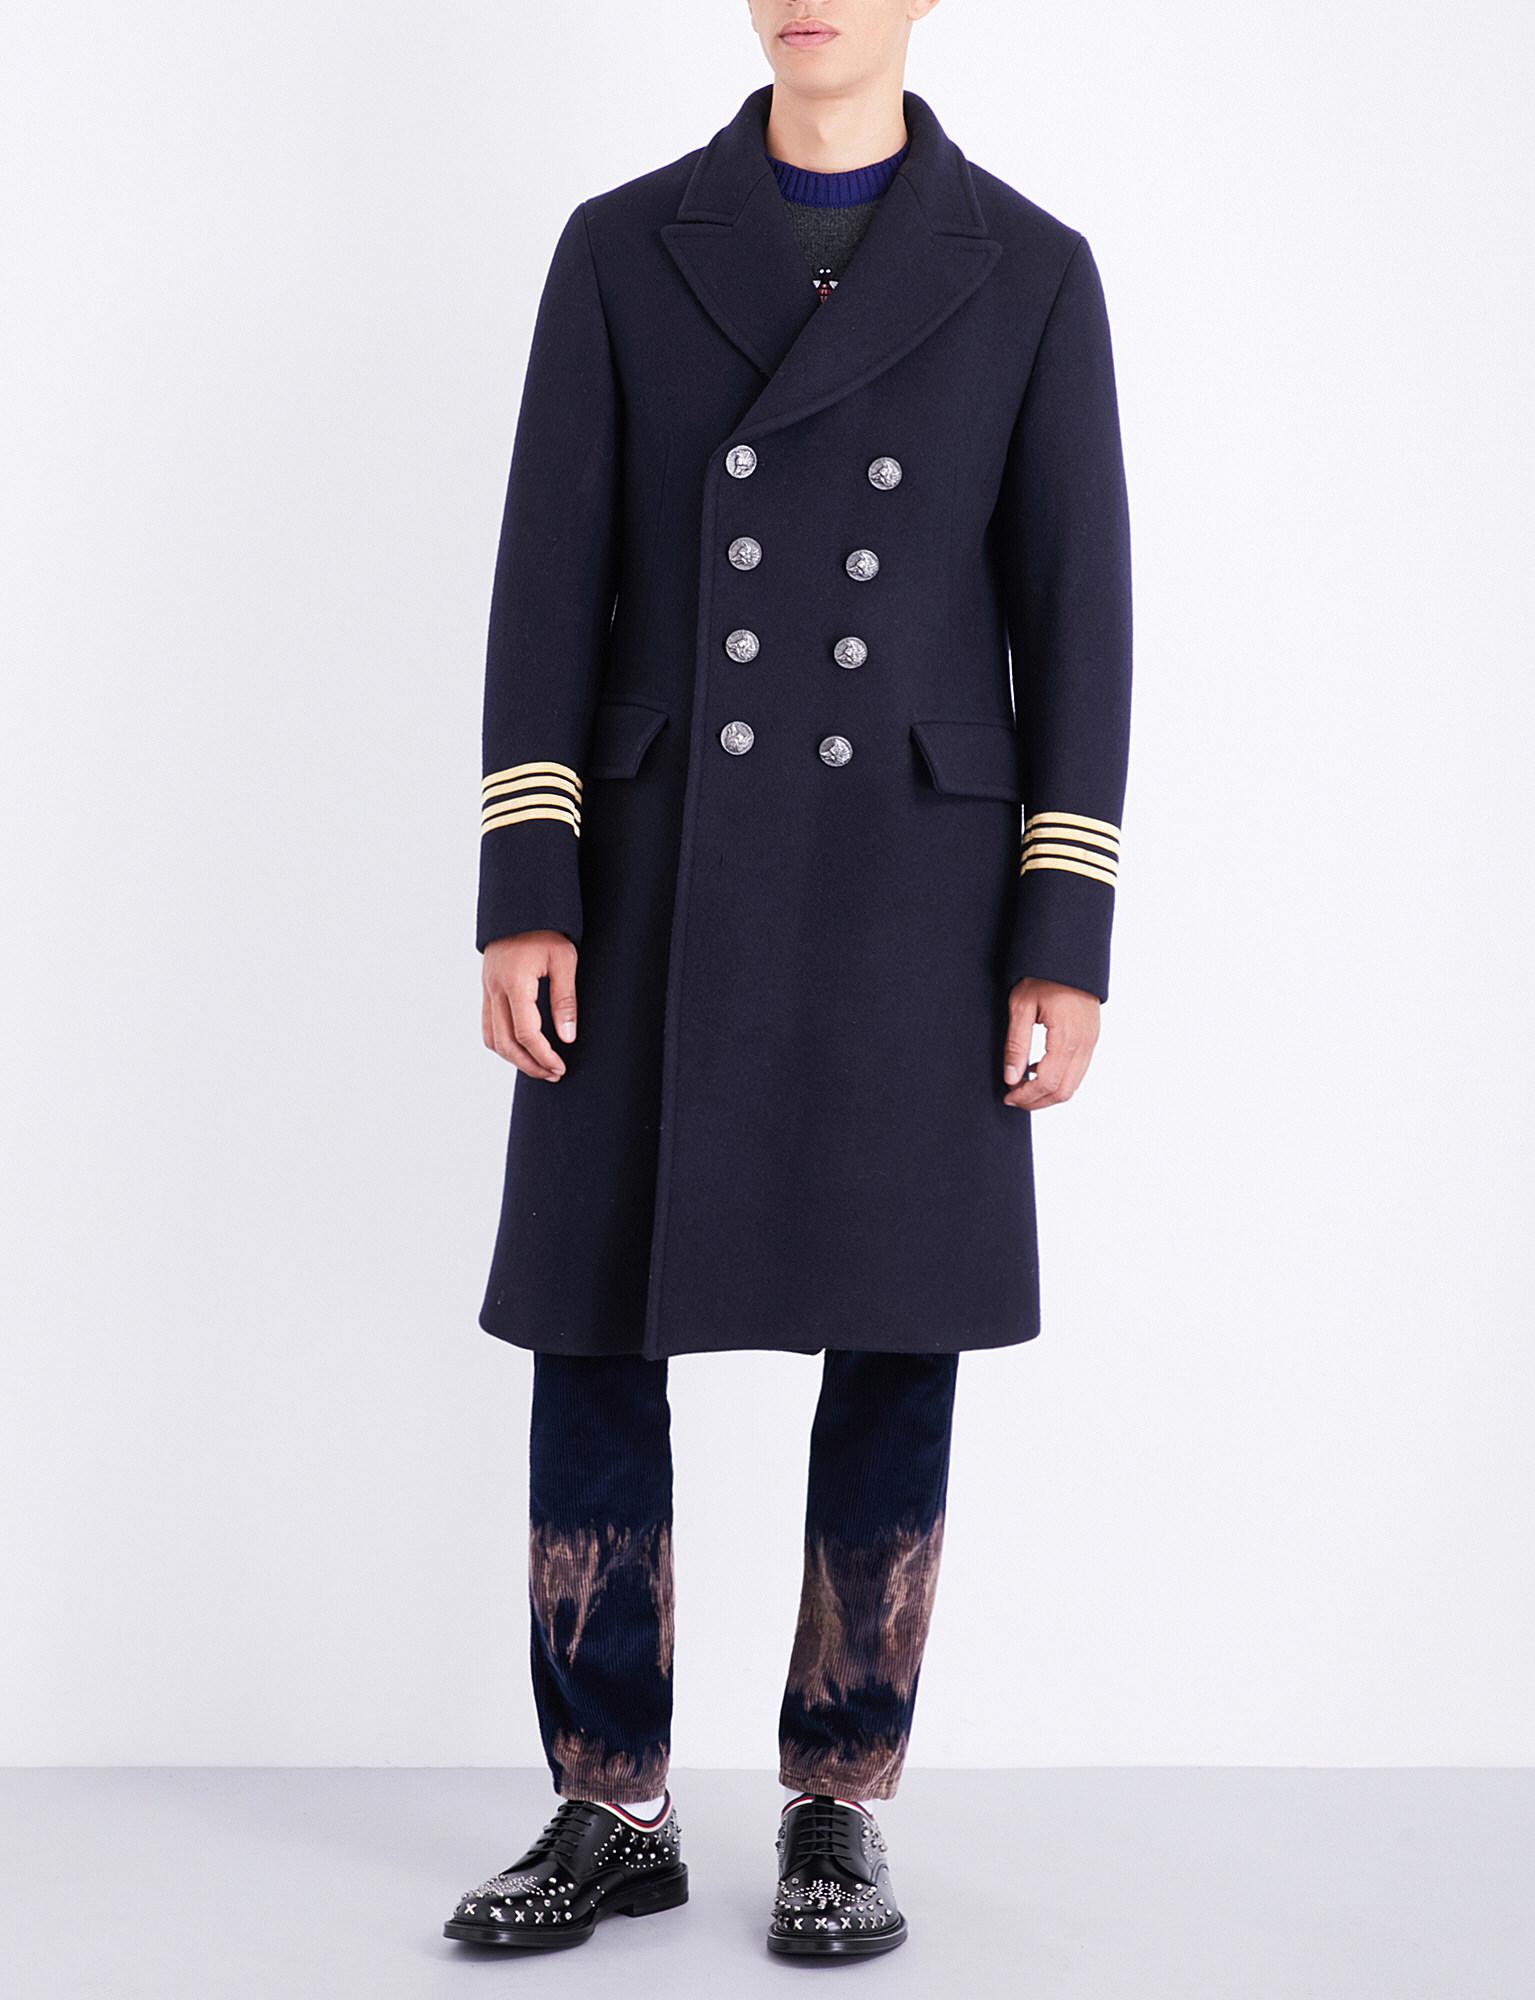 Gucci Embroidered Wool Coat in Navy 